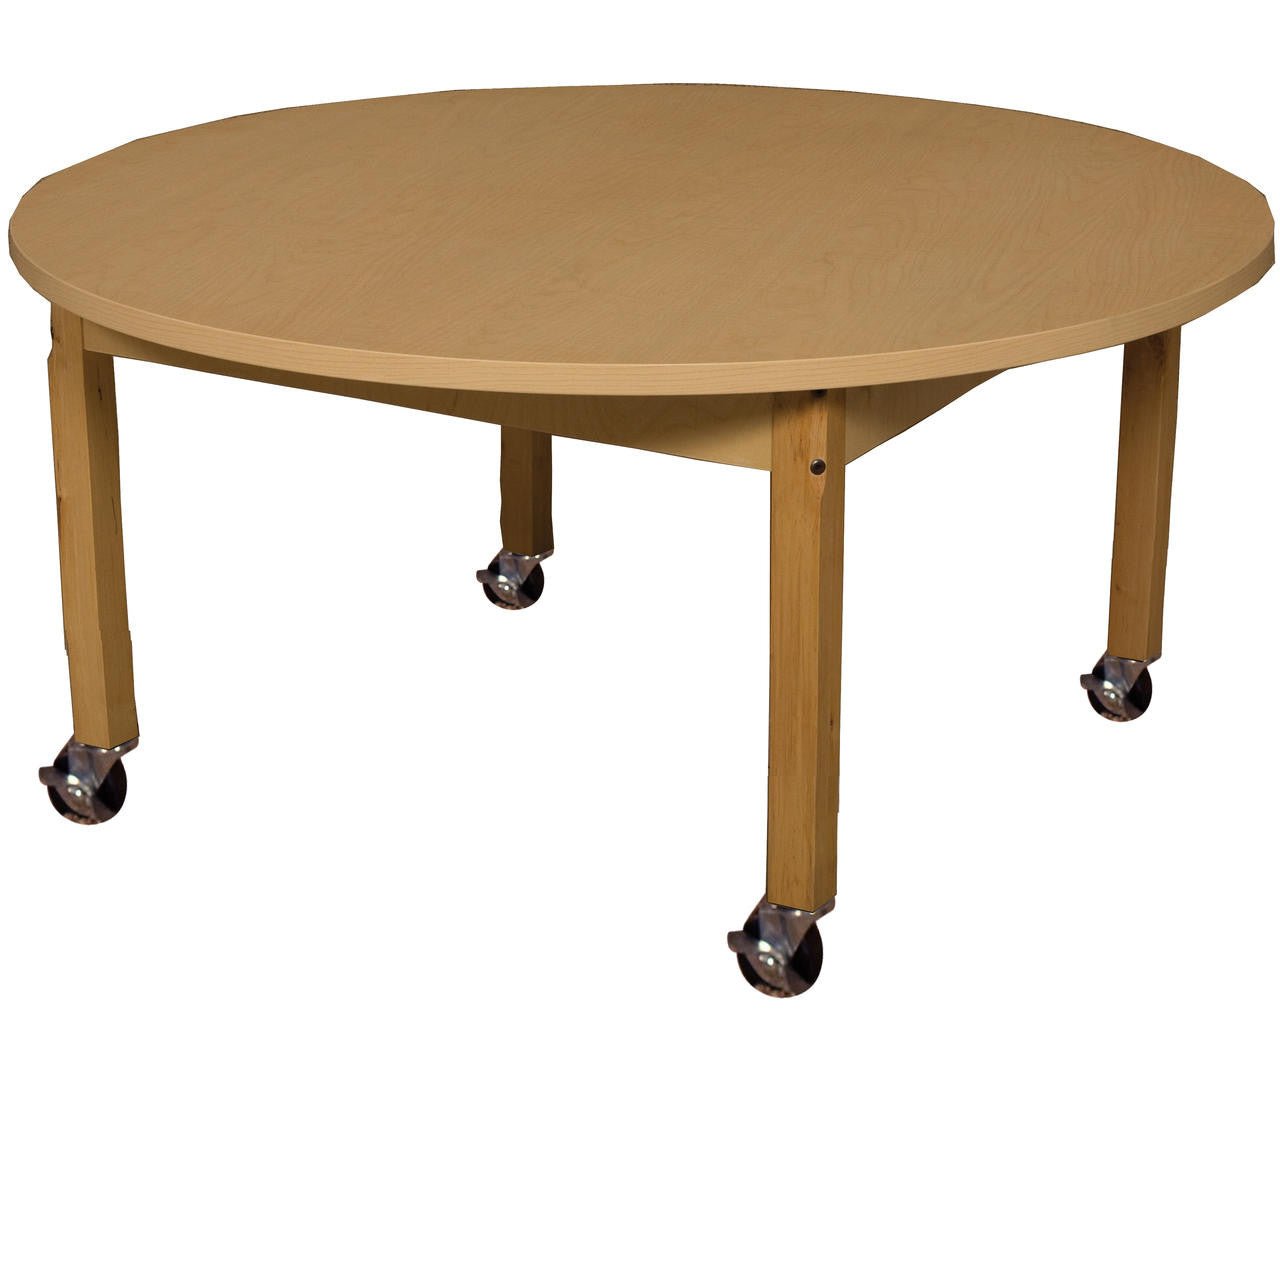 Round High Pressure Laminate Table with Hardwood Legs- 26